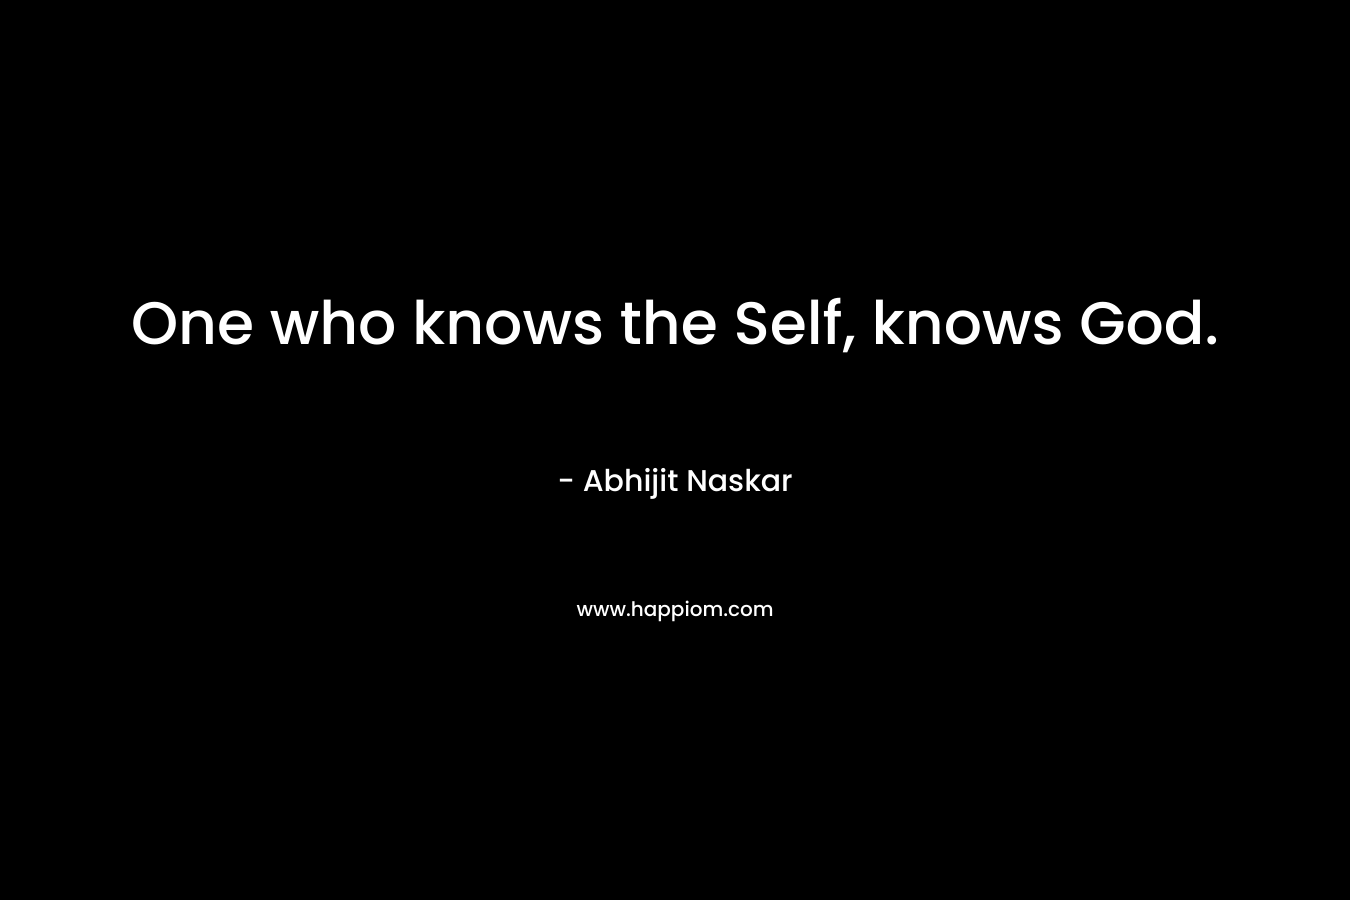 One who knows the Self, knows God.